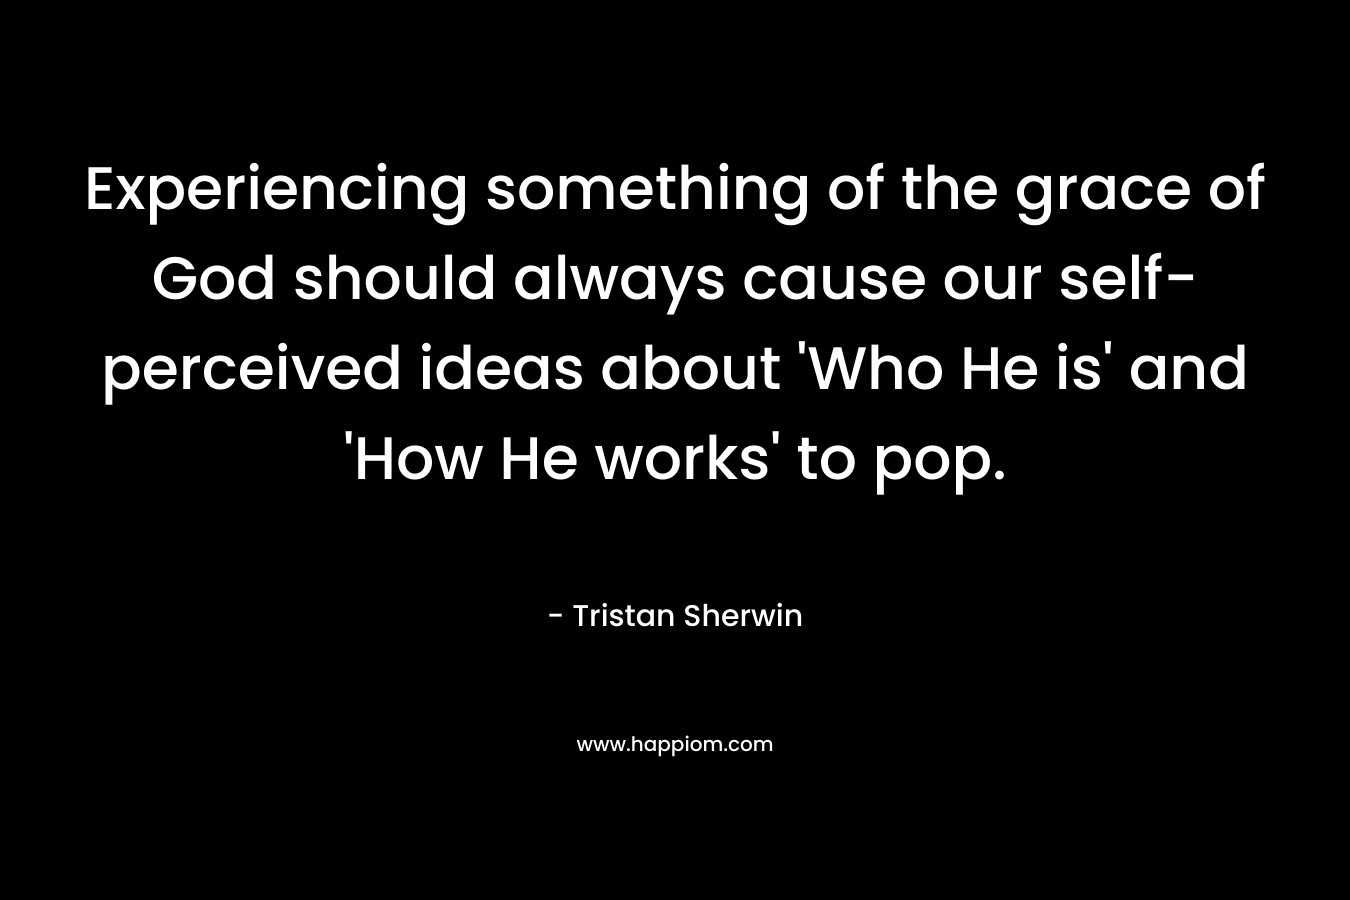 Experiencing something of the grace of God should always cause our self-perceived ideas about ‘Who He is’ and ‘How He works’ to pop. – Tristan Sherwin